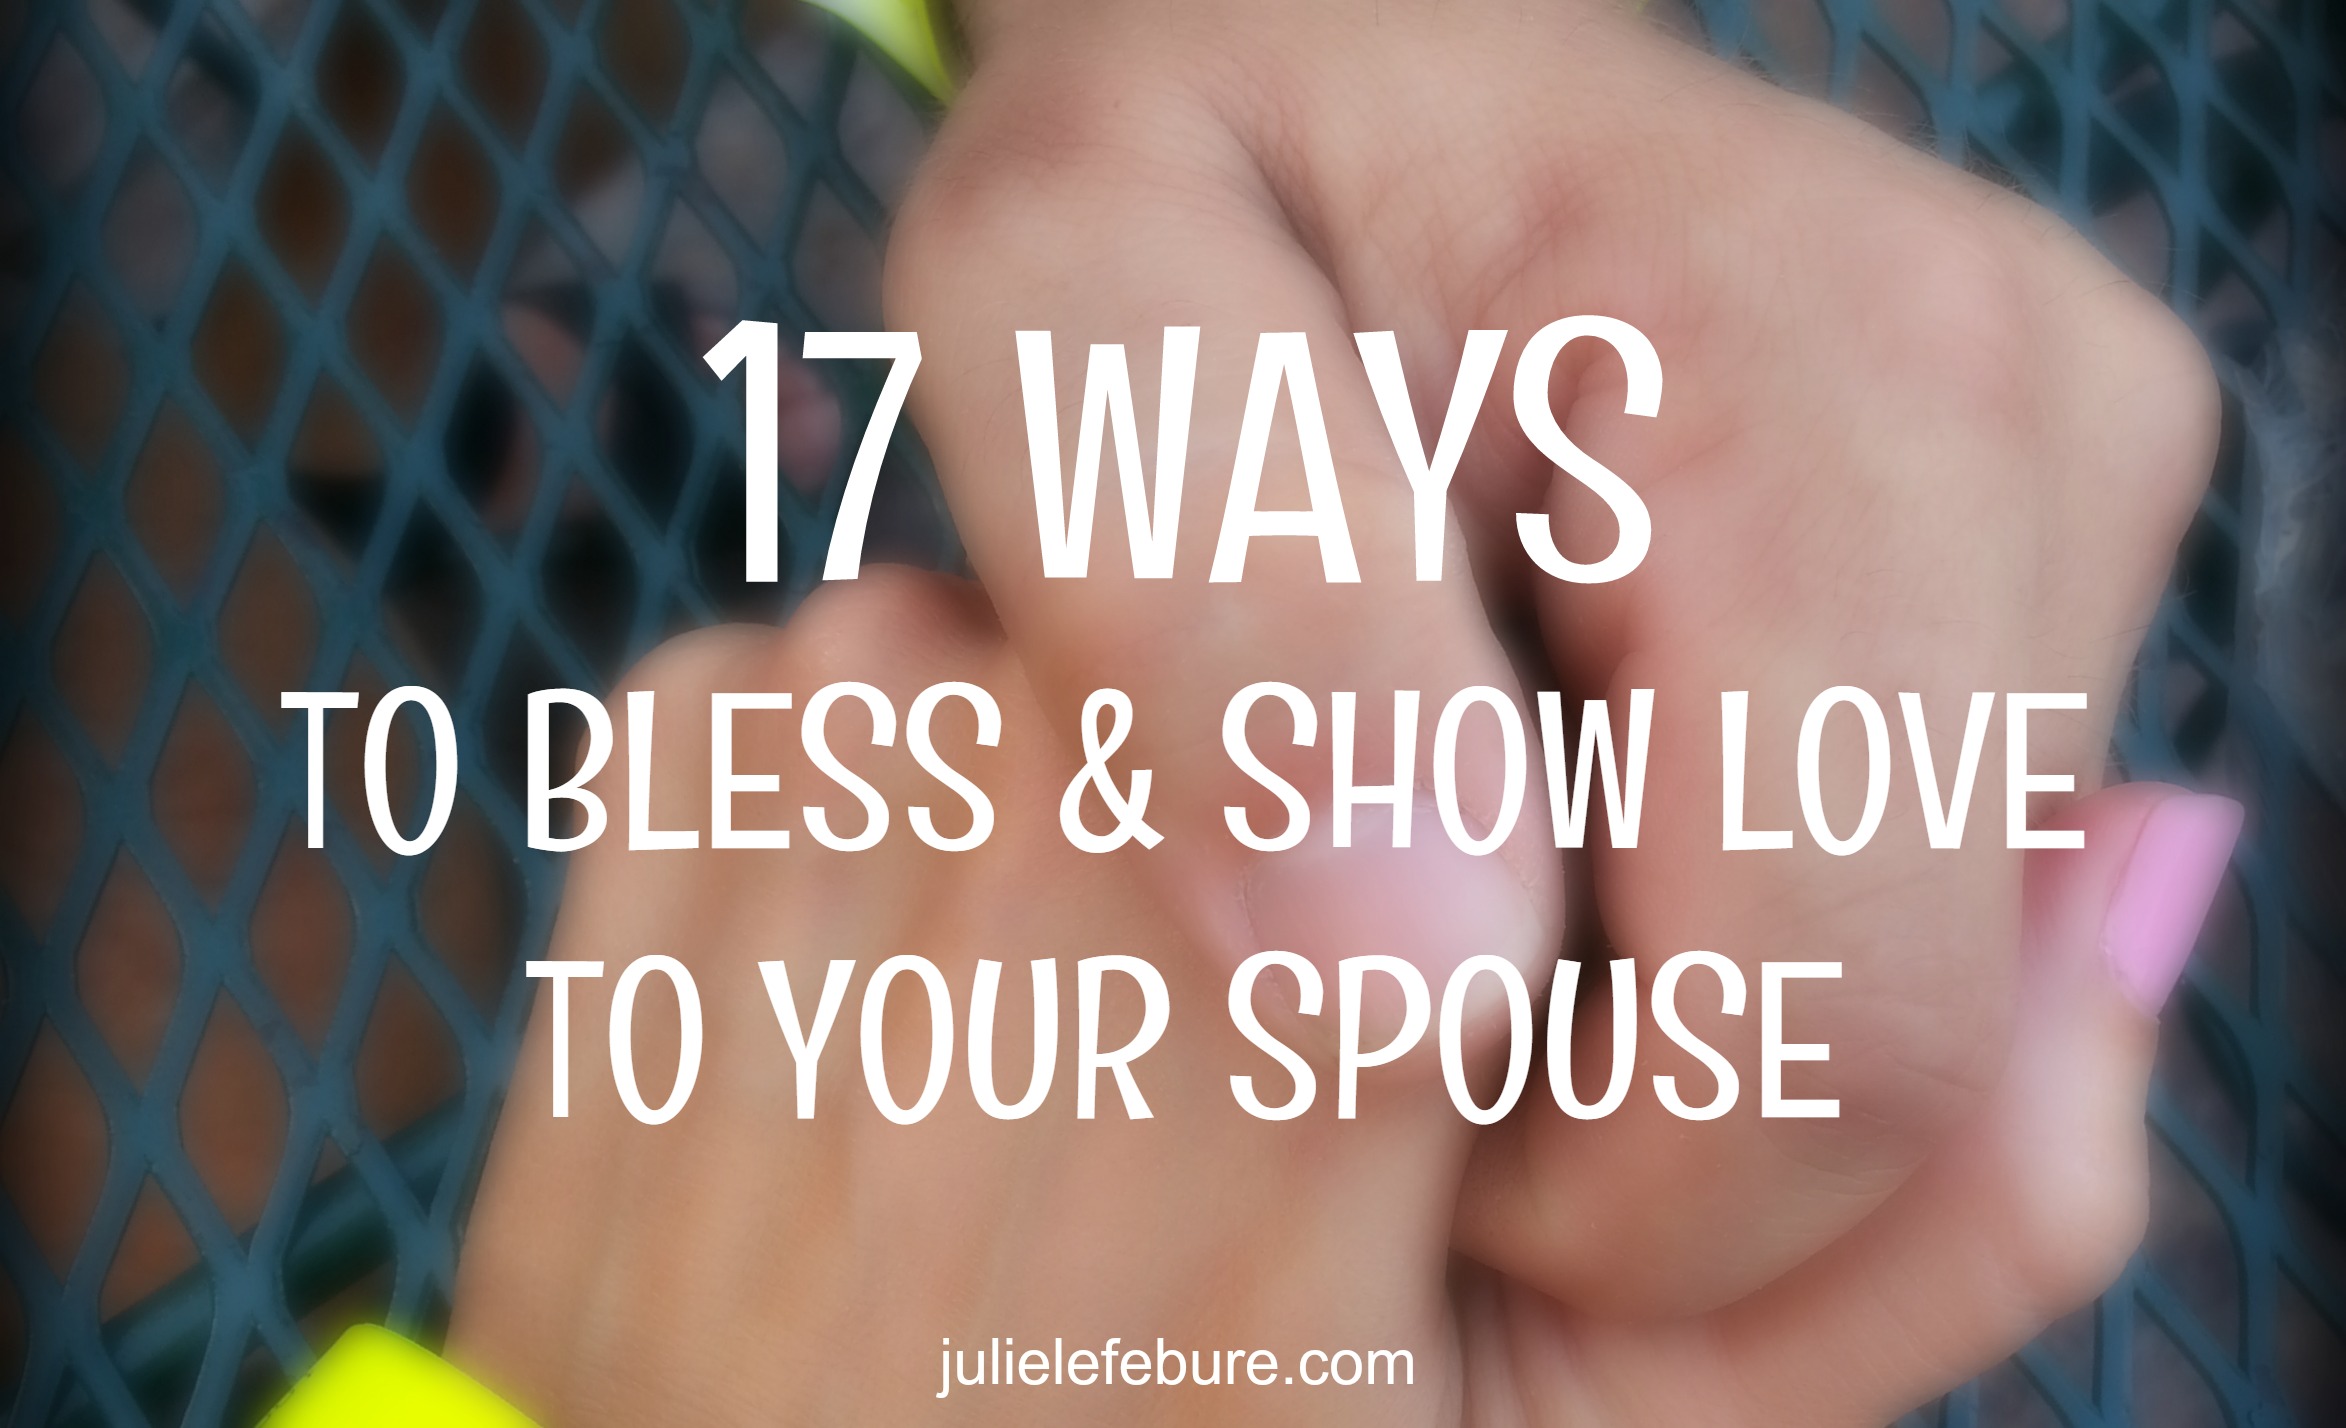 17 Ways To Bless & Show Love To Your Spouse